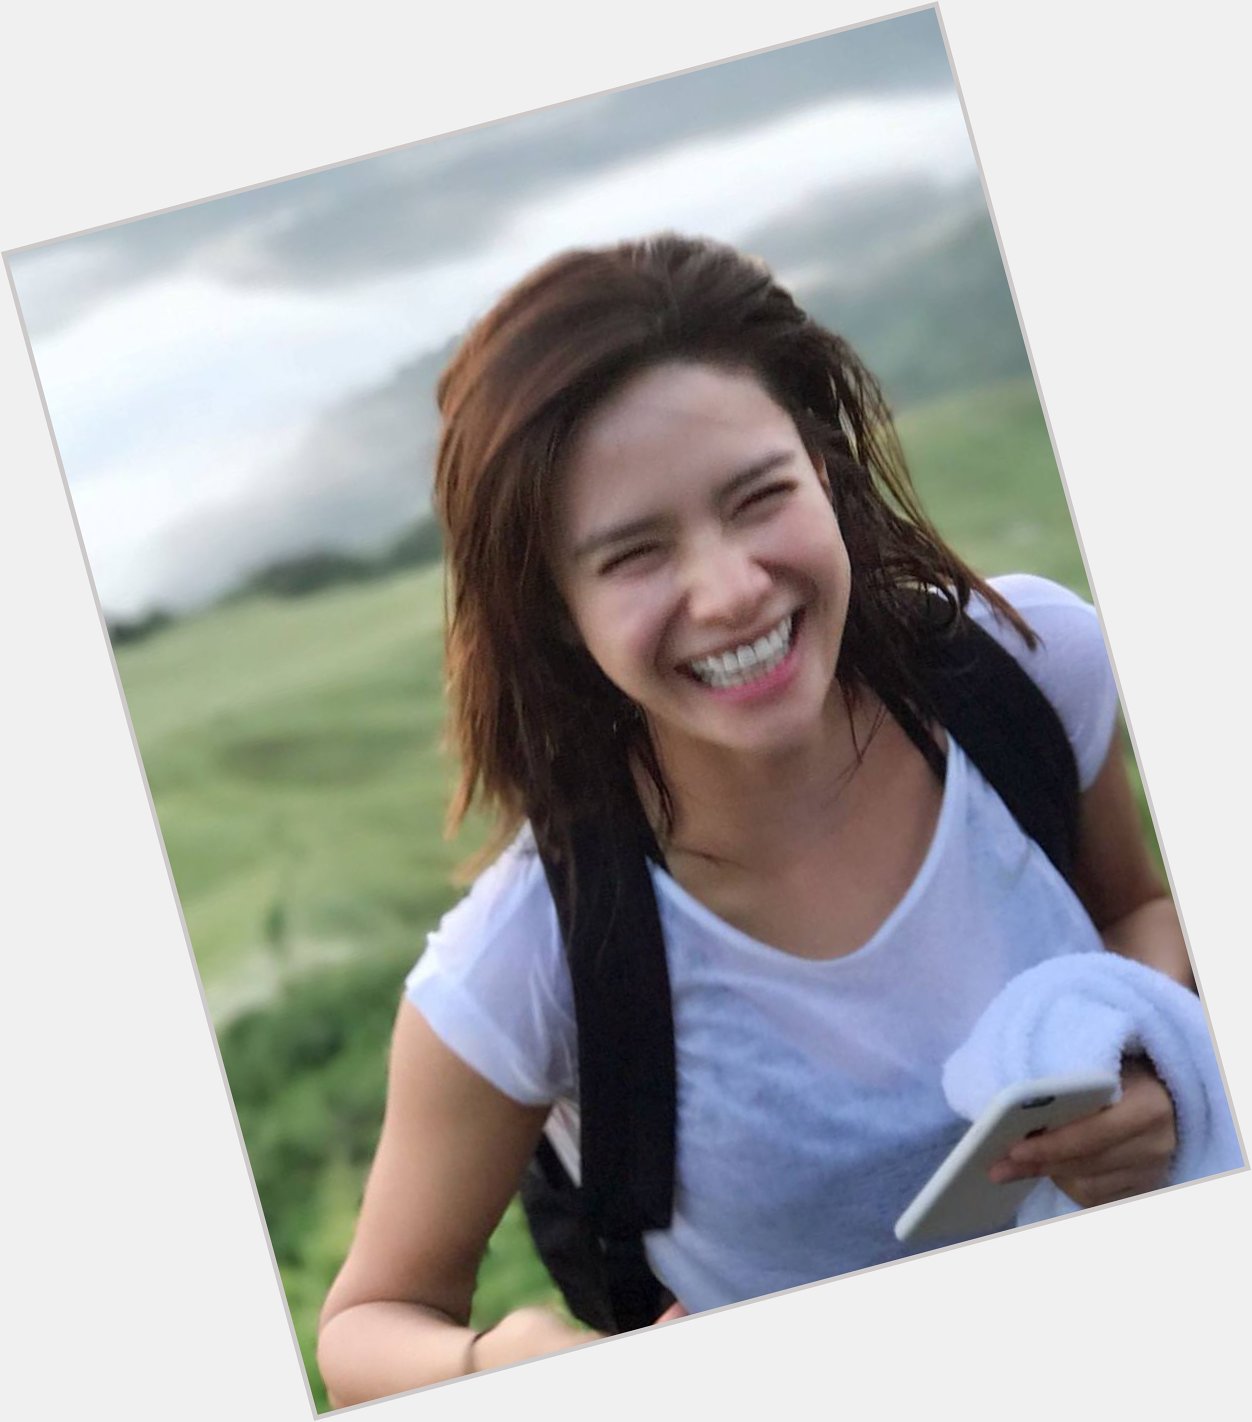 Happy Birthday ms erich gonzales  Stay Happy..We love you erich!!   Godbless.  